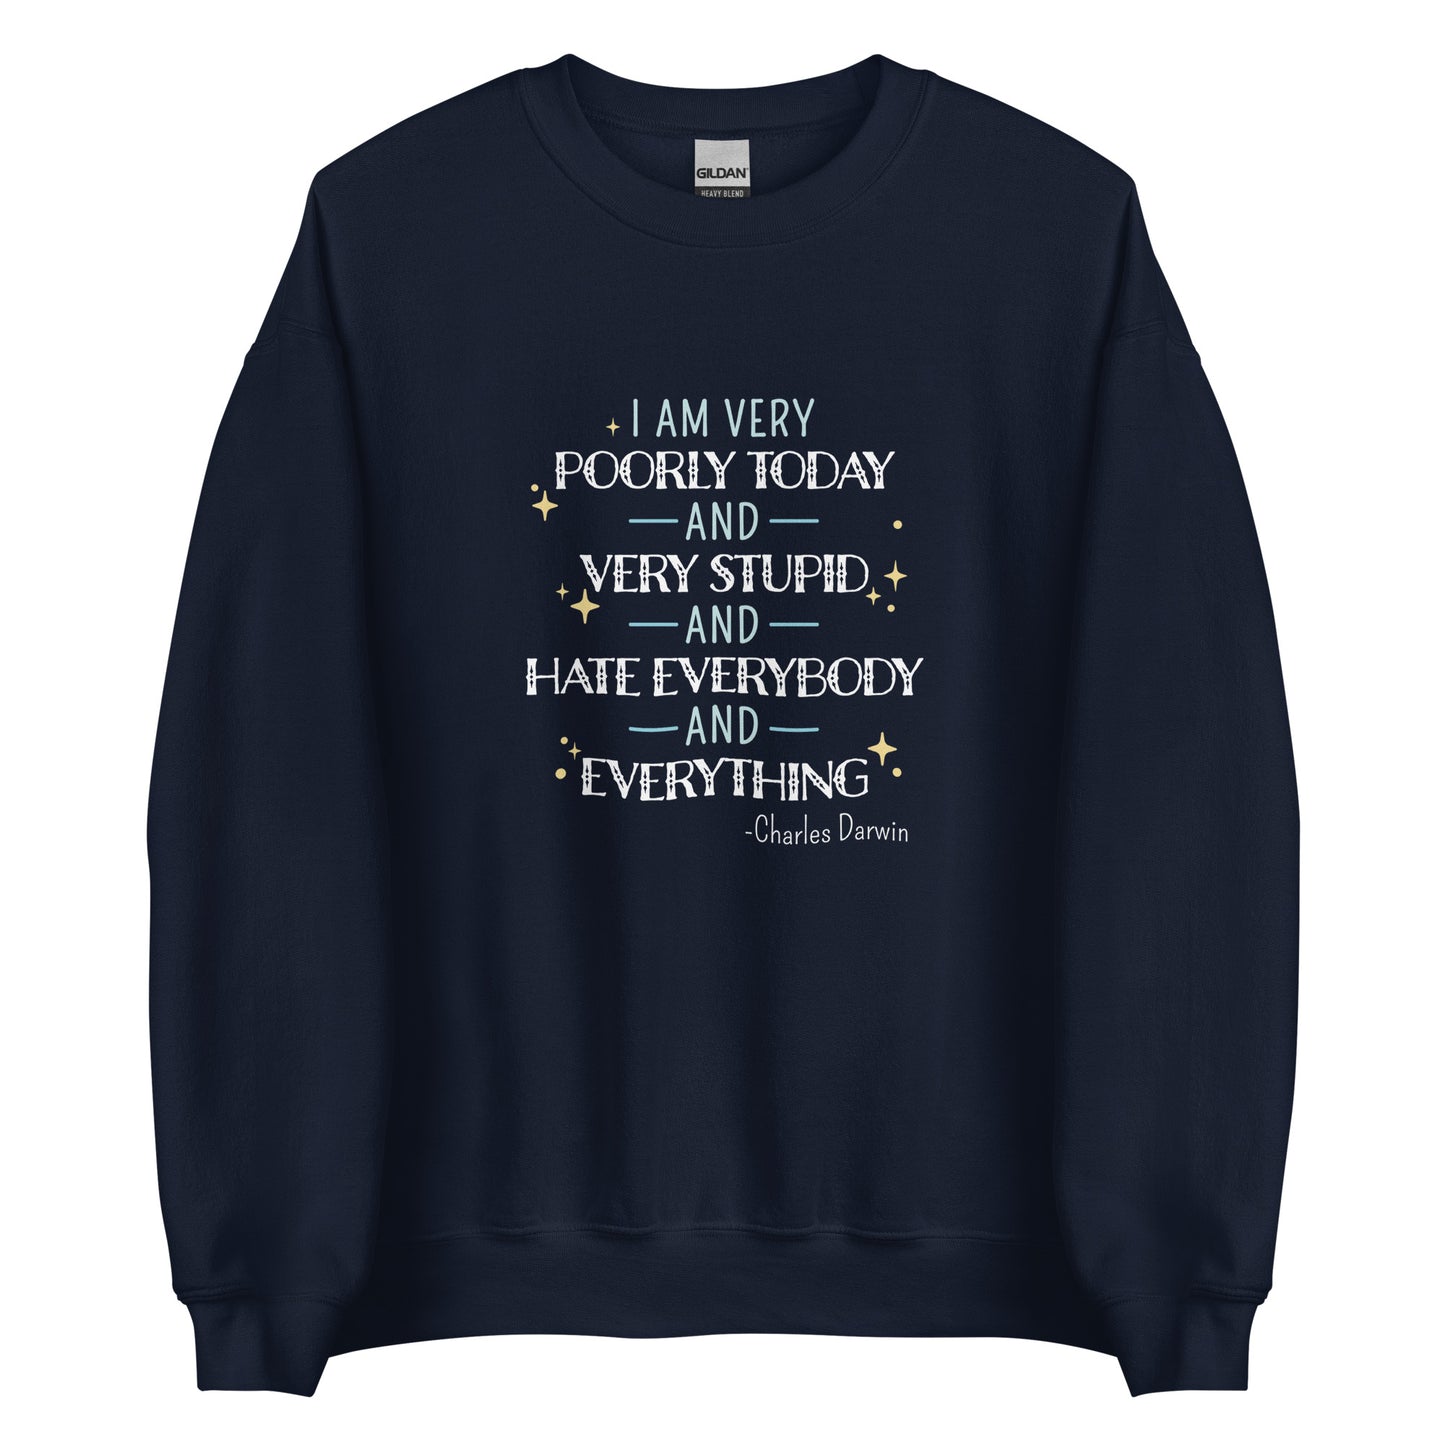 A navy crewneck sweatshirt featuring a stylized quote from Charles Darwin in white and blue text. The quote reads "I am very poorly today and very stupid and hate everybody and everything."